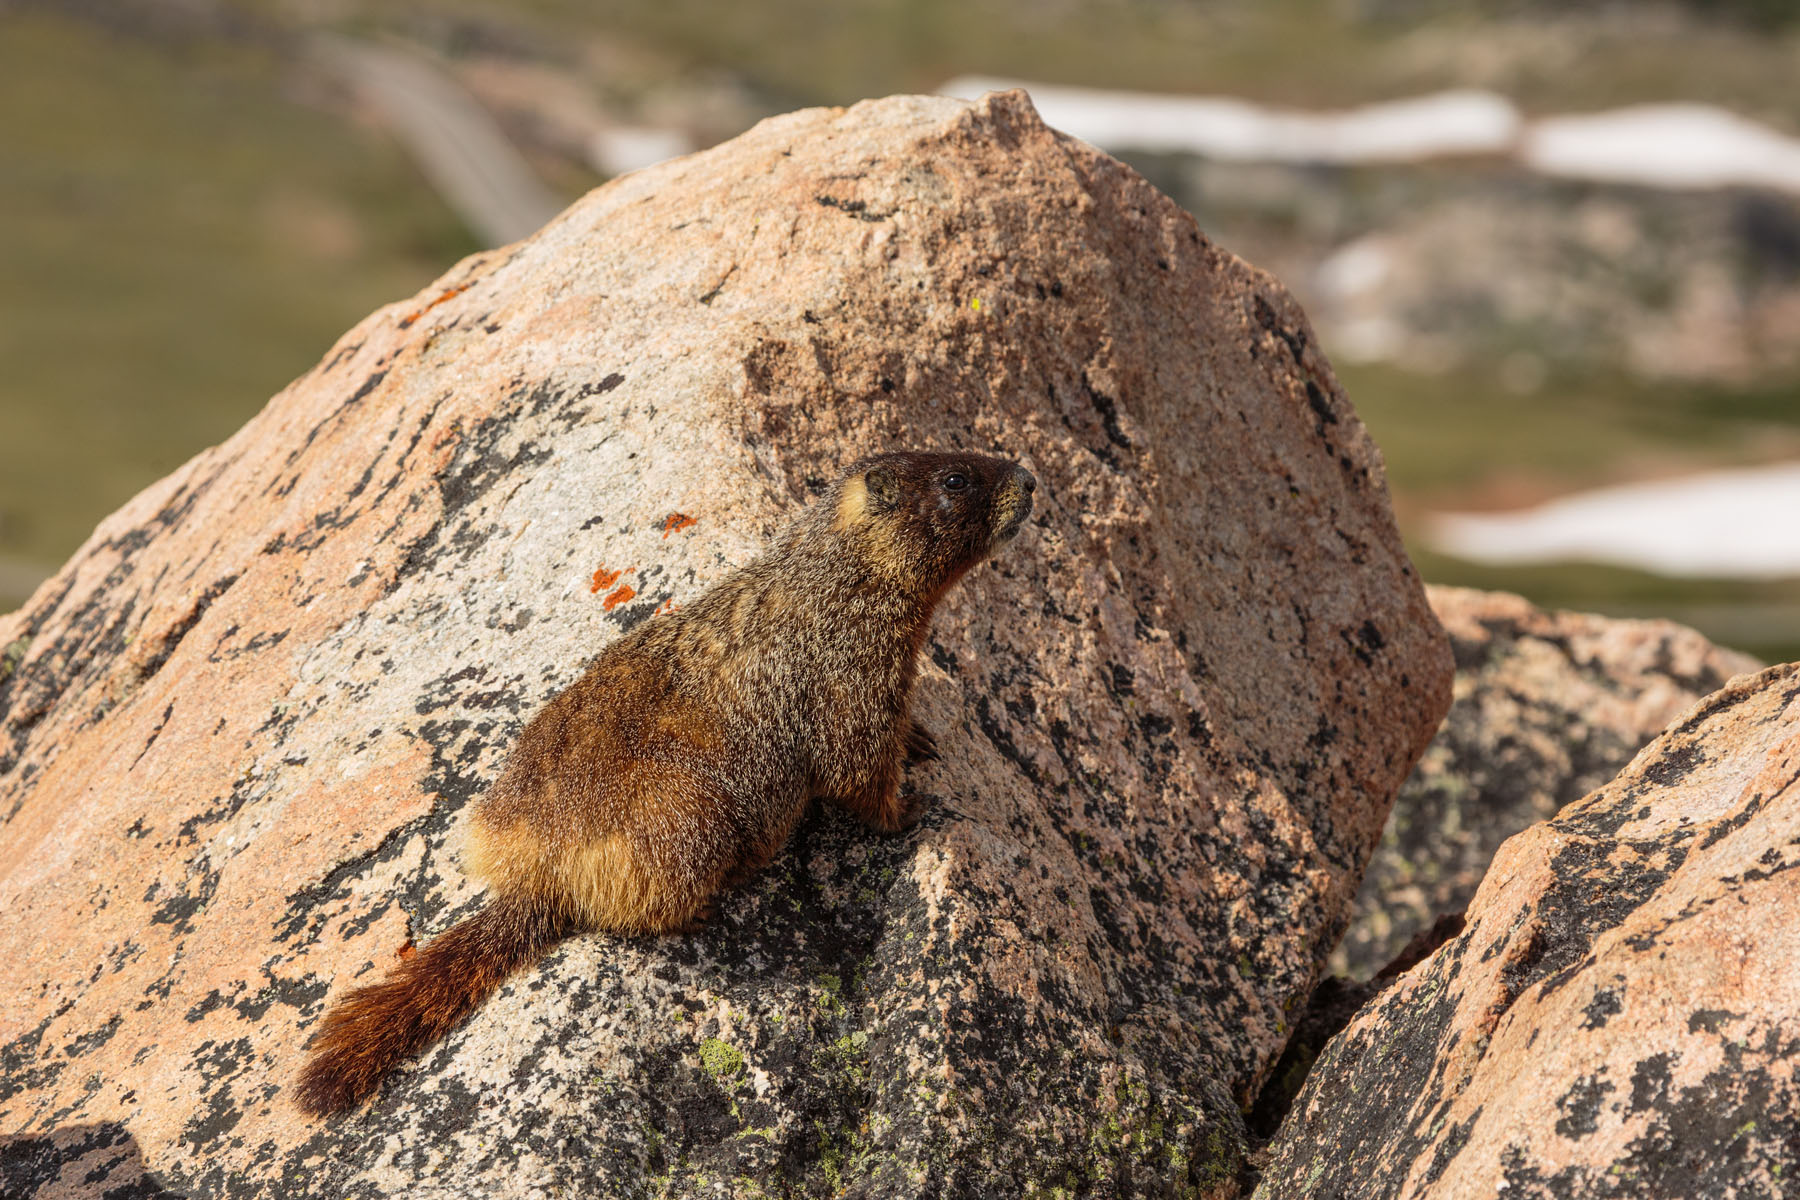 Marmot, Beartooth Highway, Wyoming.  Click for next photo.